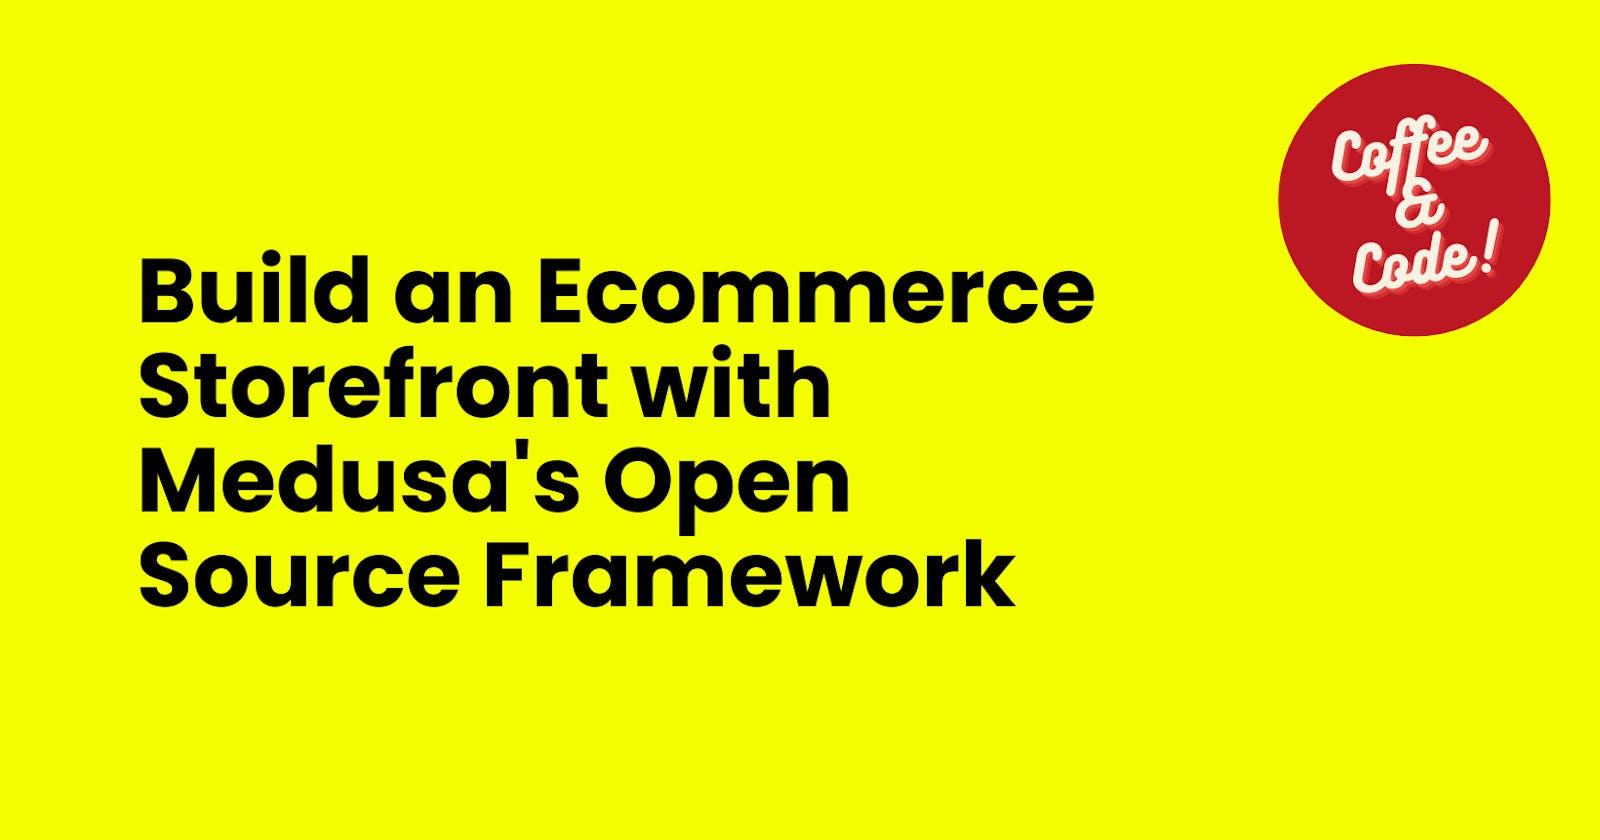 How to build  an  Ecommerce Storefront with Medusa's Open Source Framework